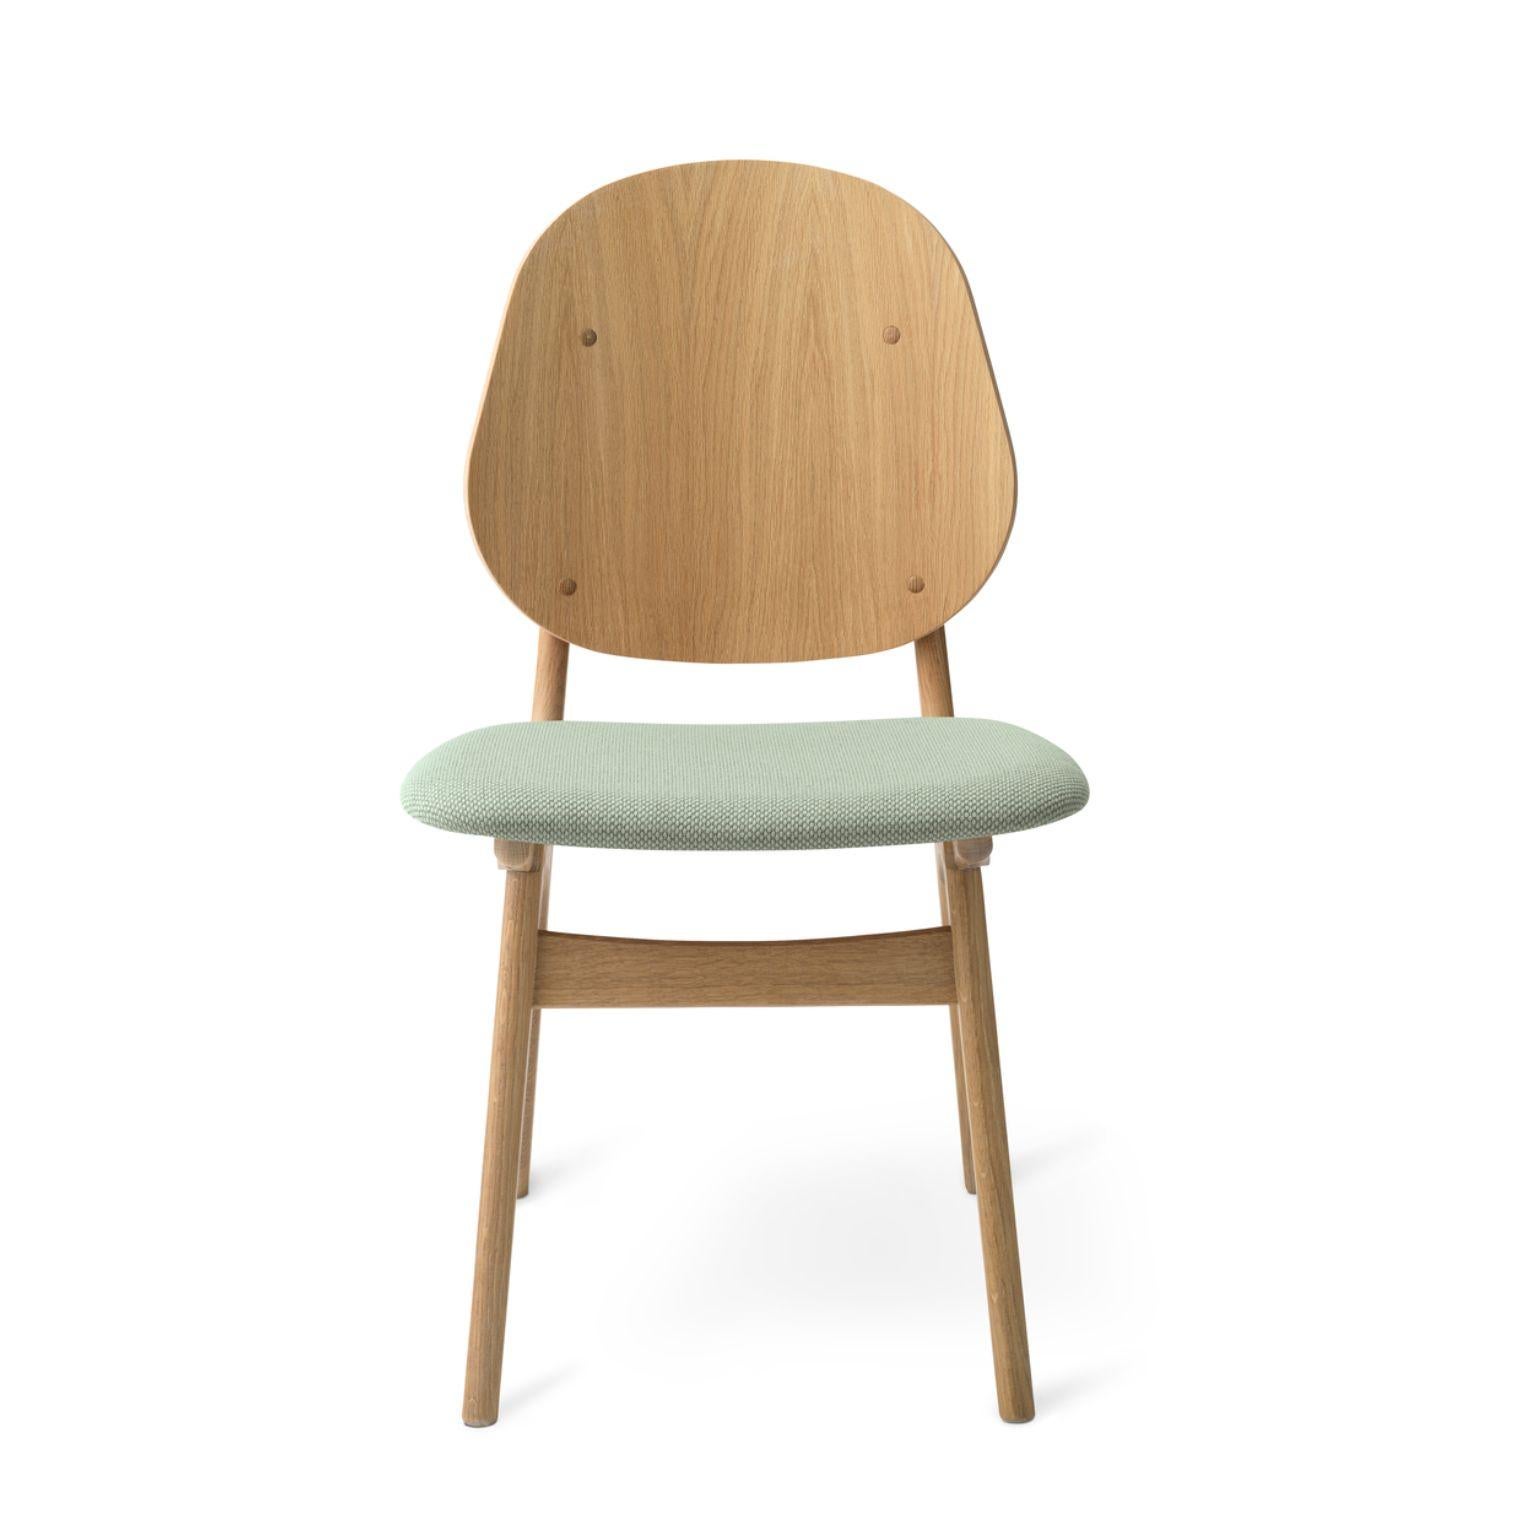 Noble Chair White Oiled Oak Light Cyan by Warm Nordic
Dimensions: D55 x W47 x H 85 cm
Material: White oiled solid oak, Veneer seat and back, Textile upholstery.
Weight: 7.5 kg
Also available in different colours and finishes.

An elegant and